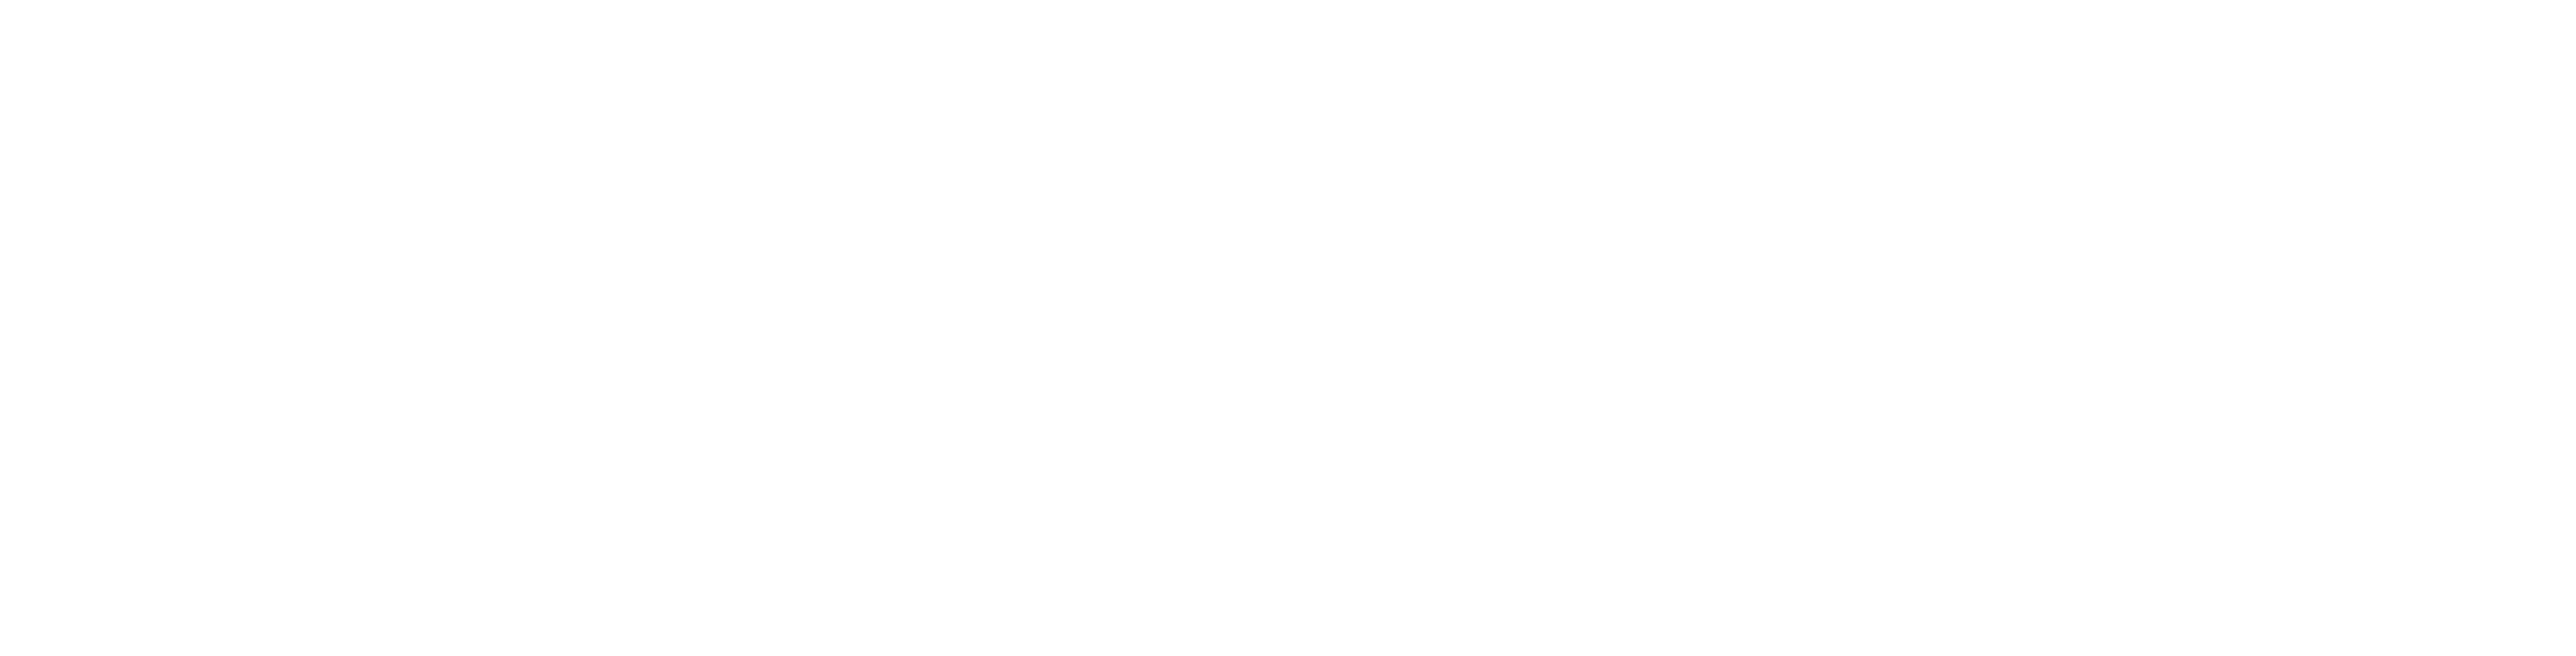 The Book of Manning logo